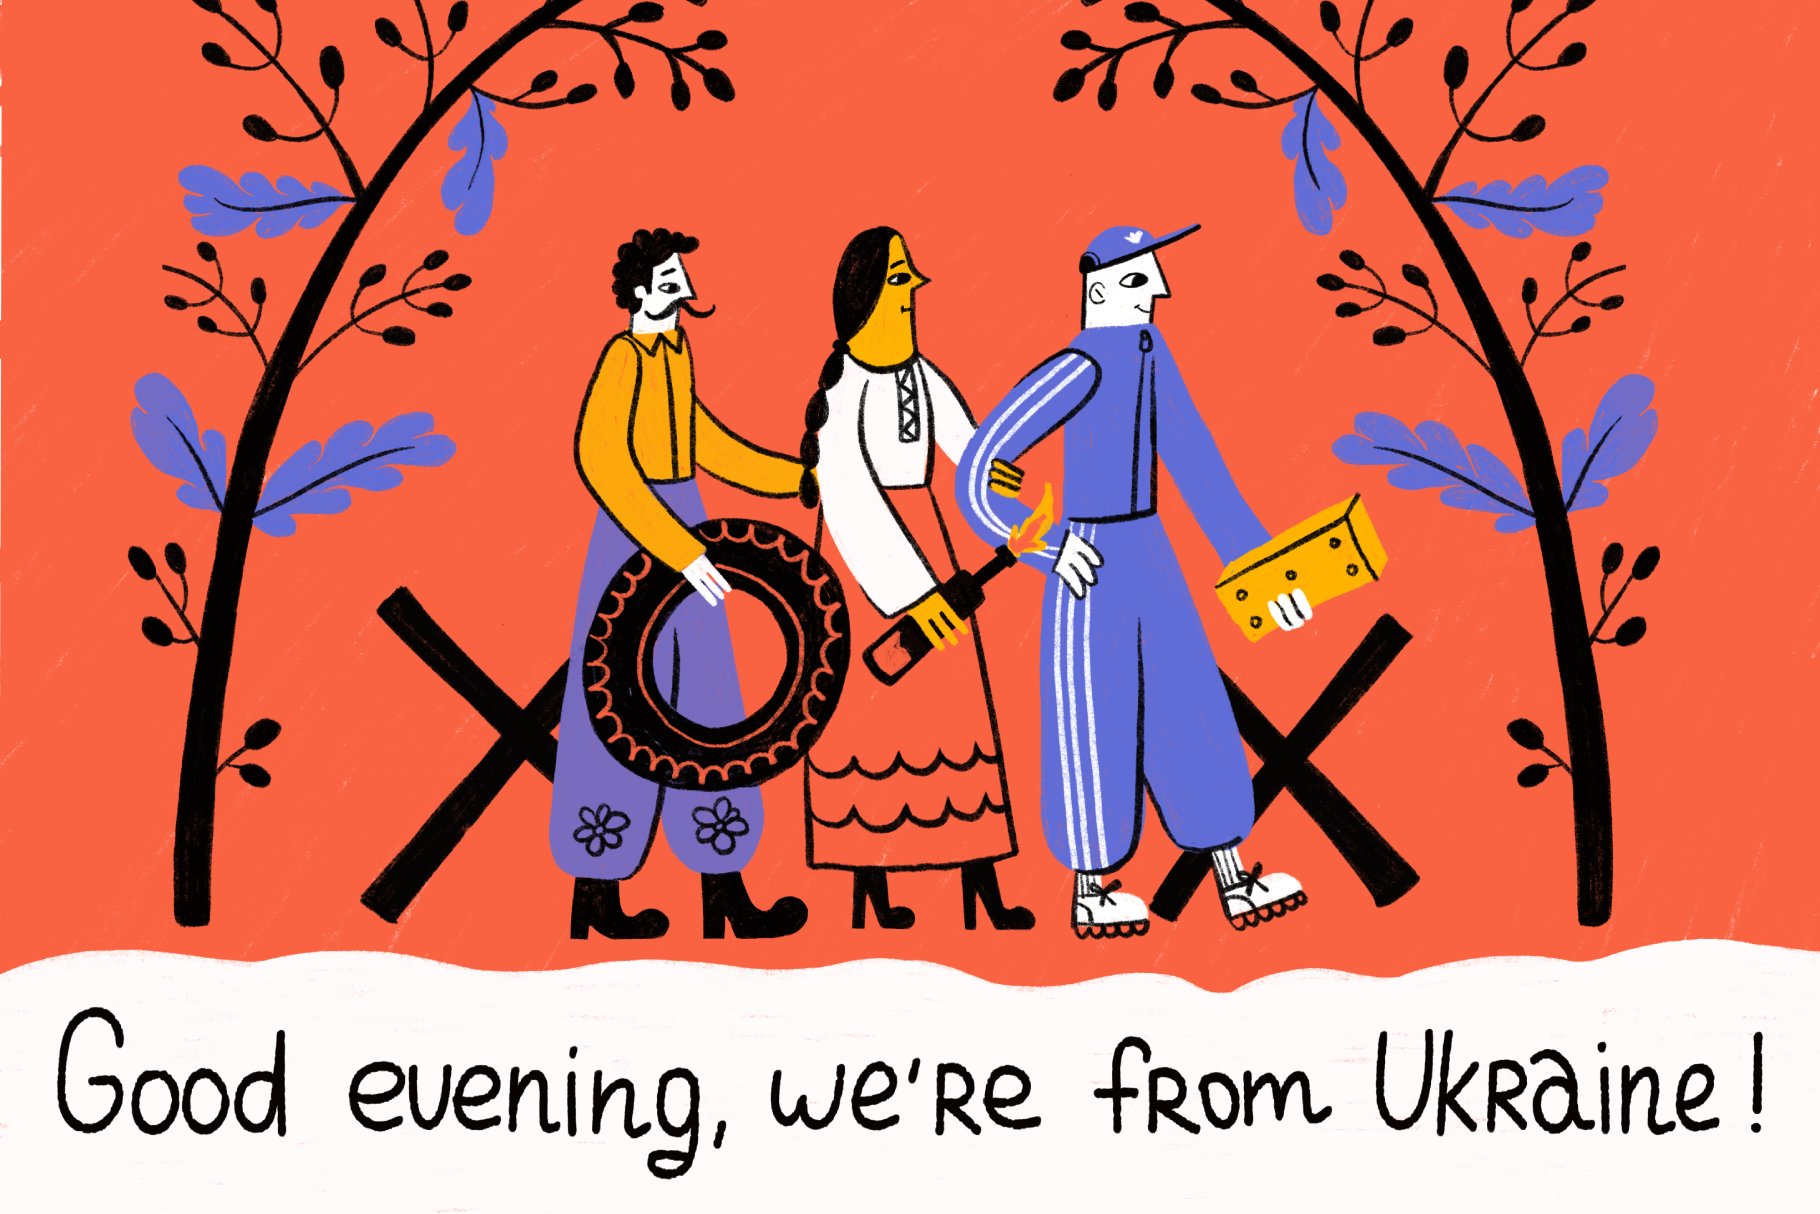 Good Evening, We're from Ukraine cover image.